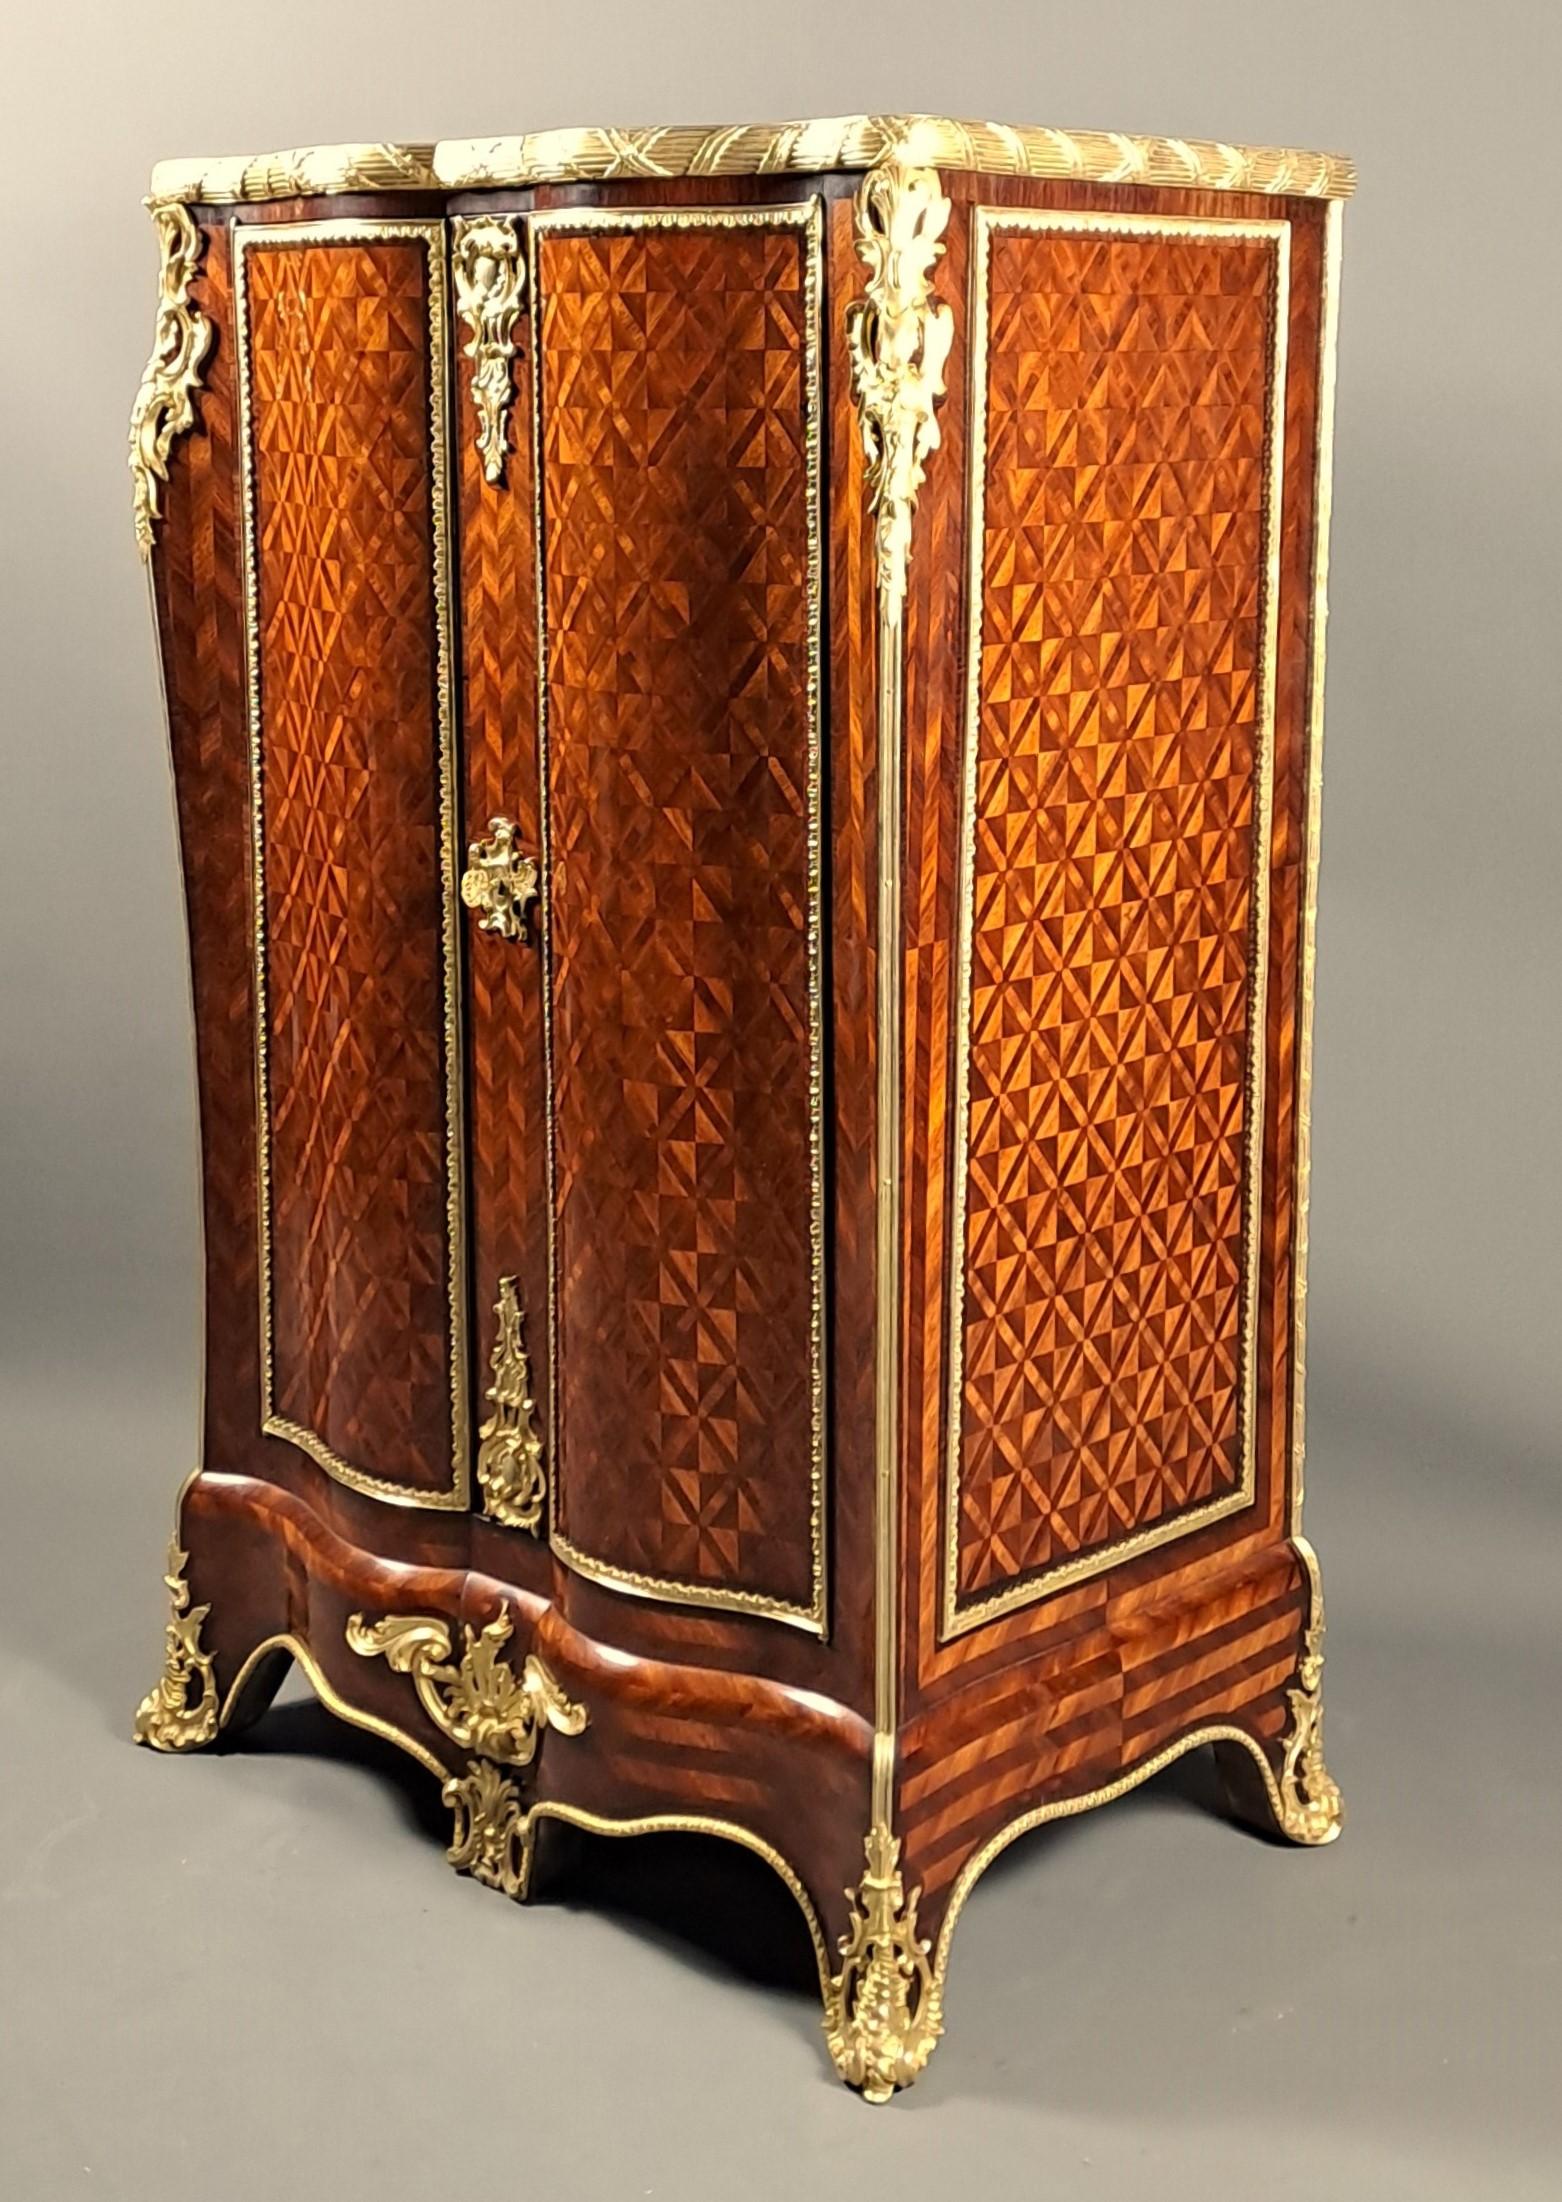 Louis-Auguste Alfred Beurdeley (1808-1883) and his son Alfred-Emmanuel Beurdeley (1847-1919)

Cabinet forming a small cupboard in the Louis XV style in geometric marquetry composed of diamonds and chevrons made of rosewood and mahogany, all